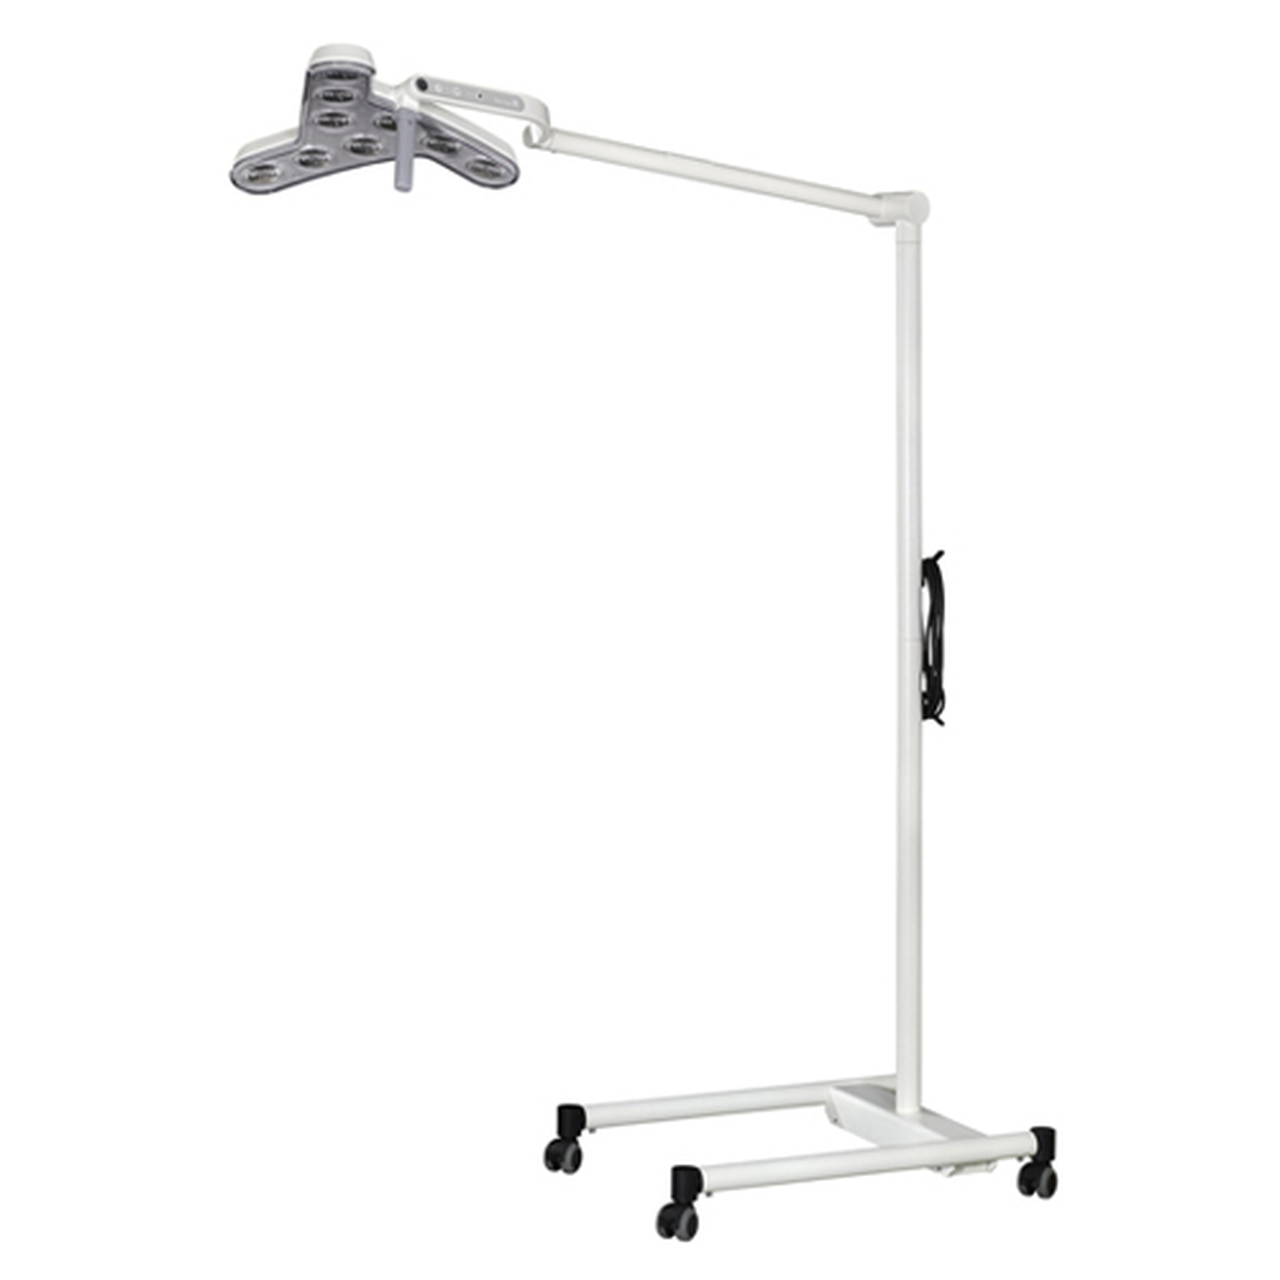 Waldmann D15976000, TRIANGO ENDO LED 100-1 F LED Procedure Light, Medical Grade, Mobile Floor Stand, with Dimming, with Endo Mode